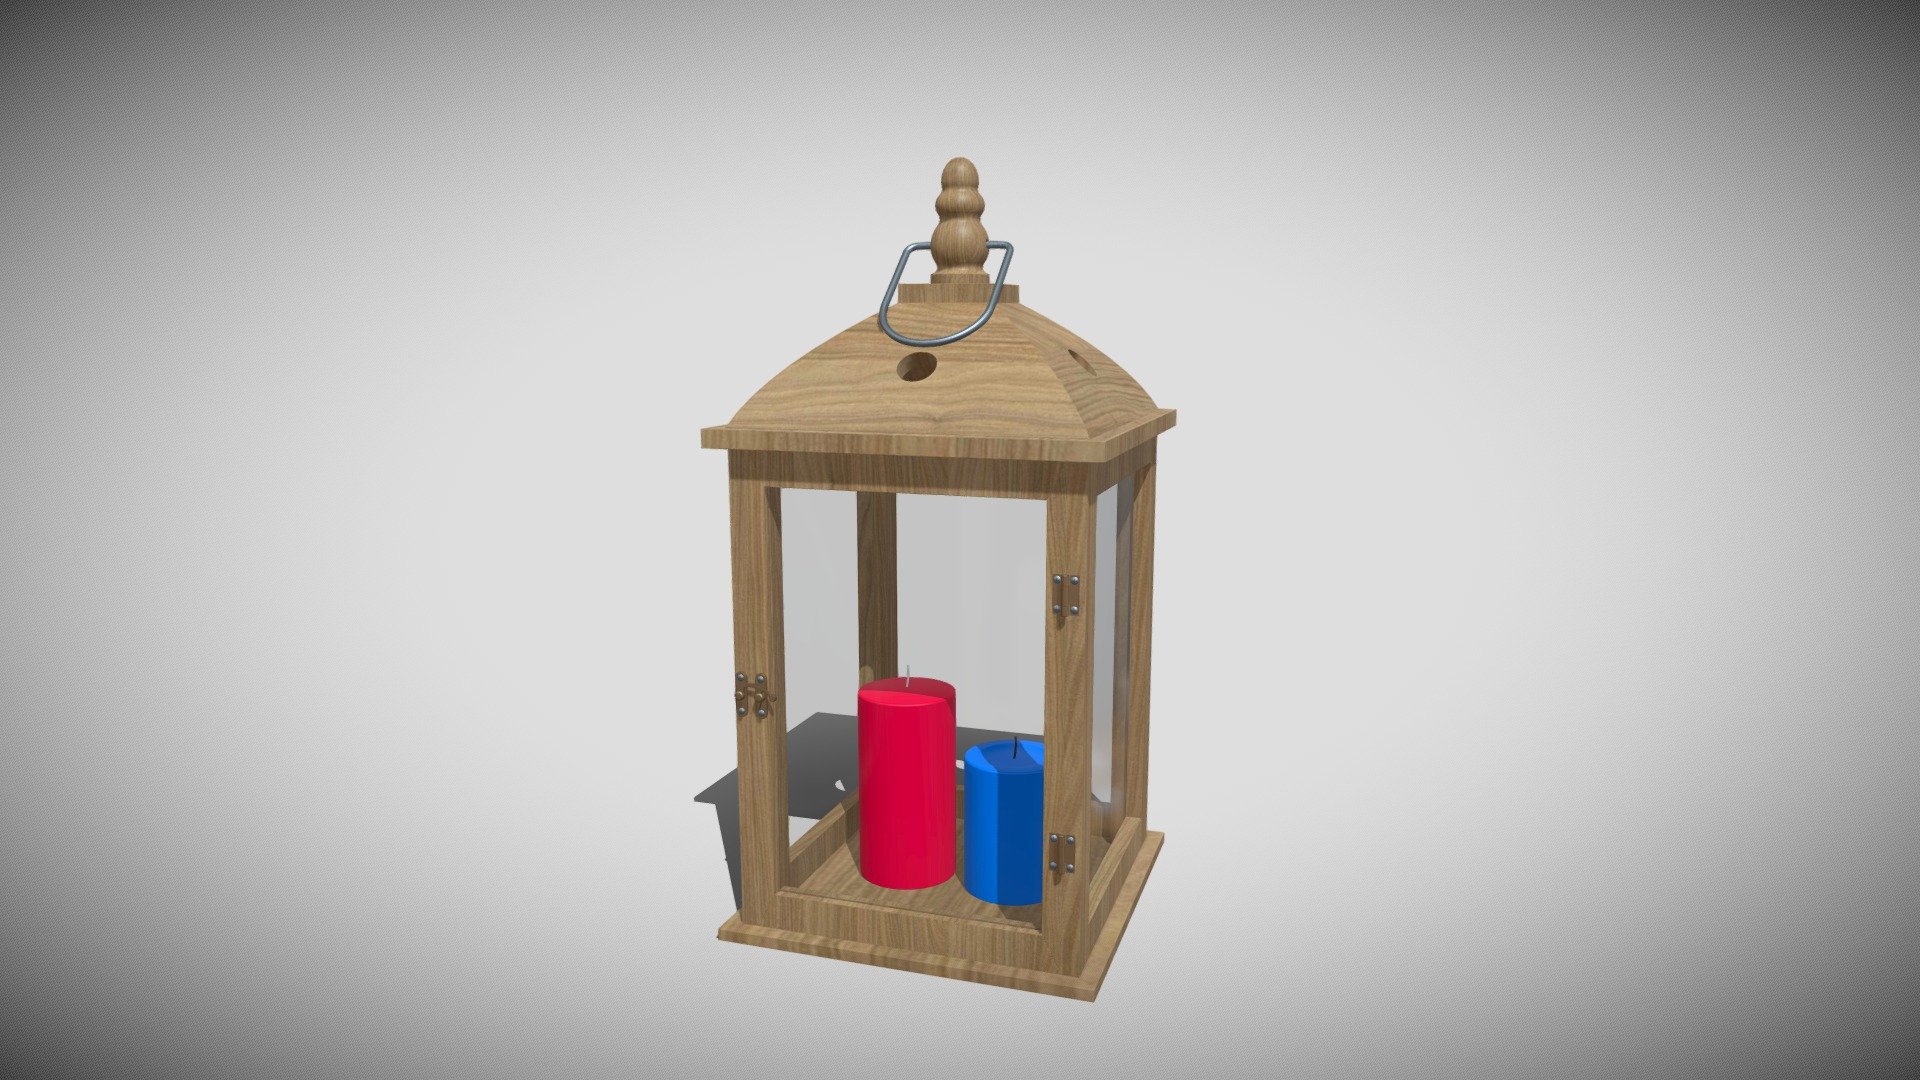 Detailed model of a Wood Lantern, modeled in Cinema 4D.The model was created using approximate real world dimensions.

The model has 12,196 polys and 11,988 vertices.

An additional file has been provided containing the original Cinema 4D project files, textures and other 3d export files such as 3ds, fbx and obj 3d model